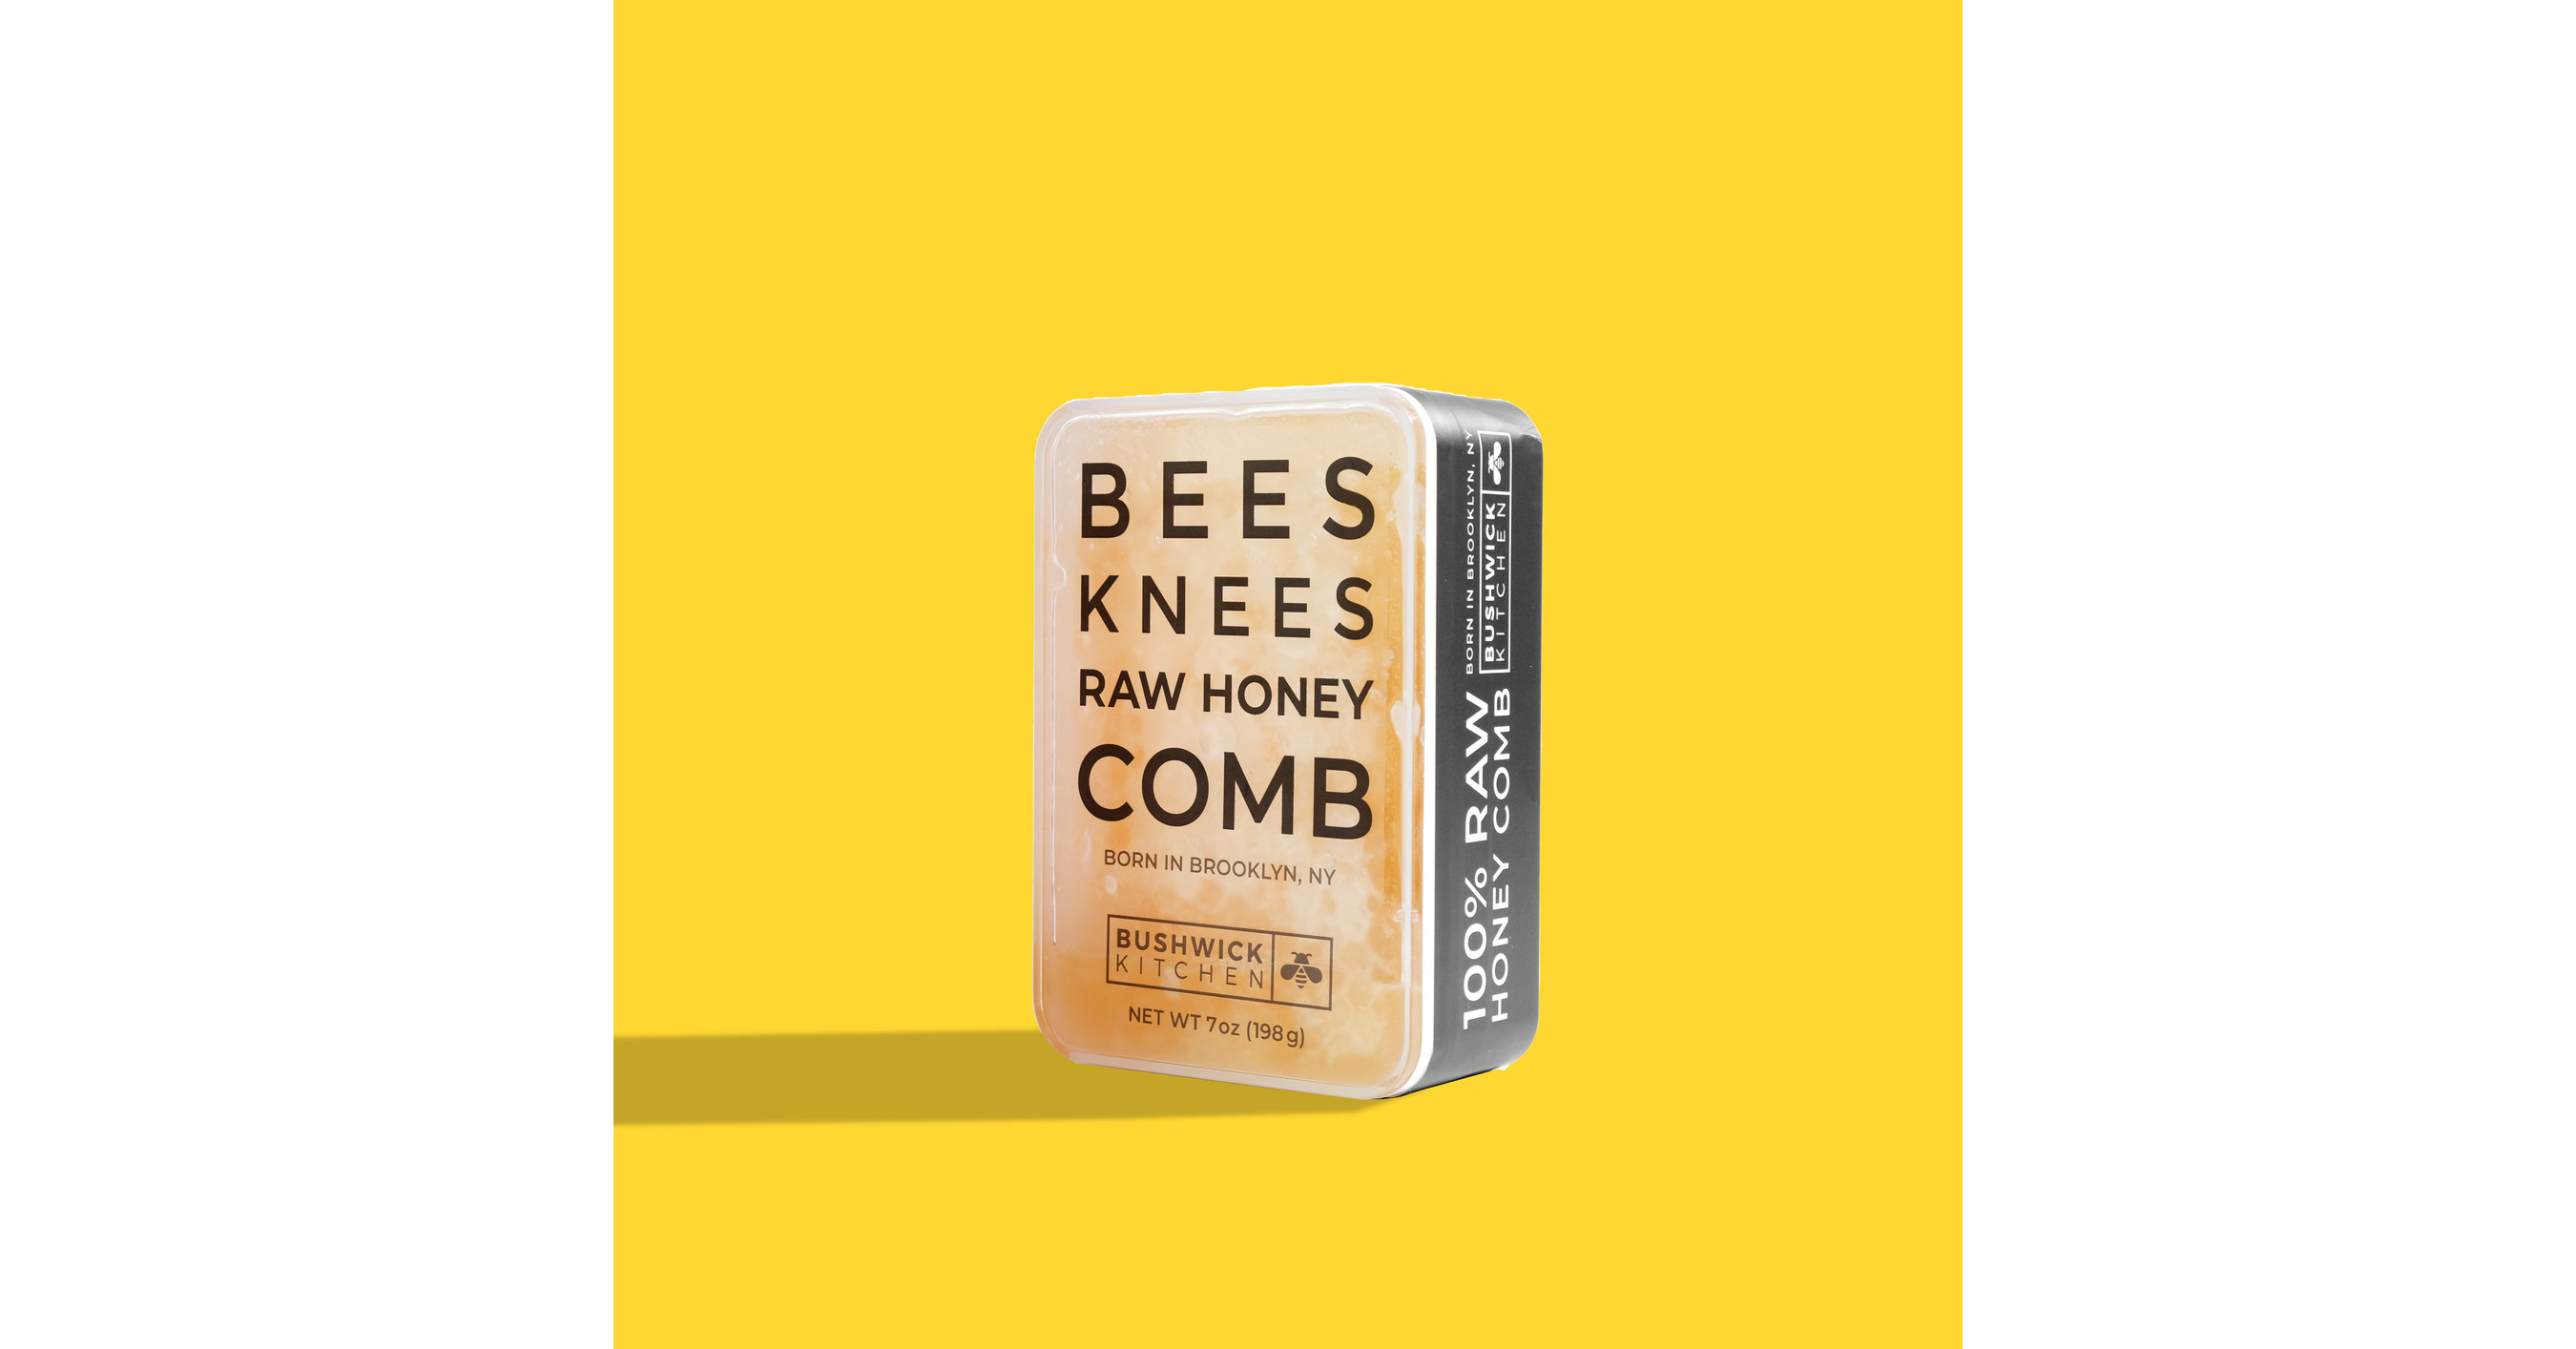 Comb Honey - Honey in the Comb  Product of Canada - Planet Bee